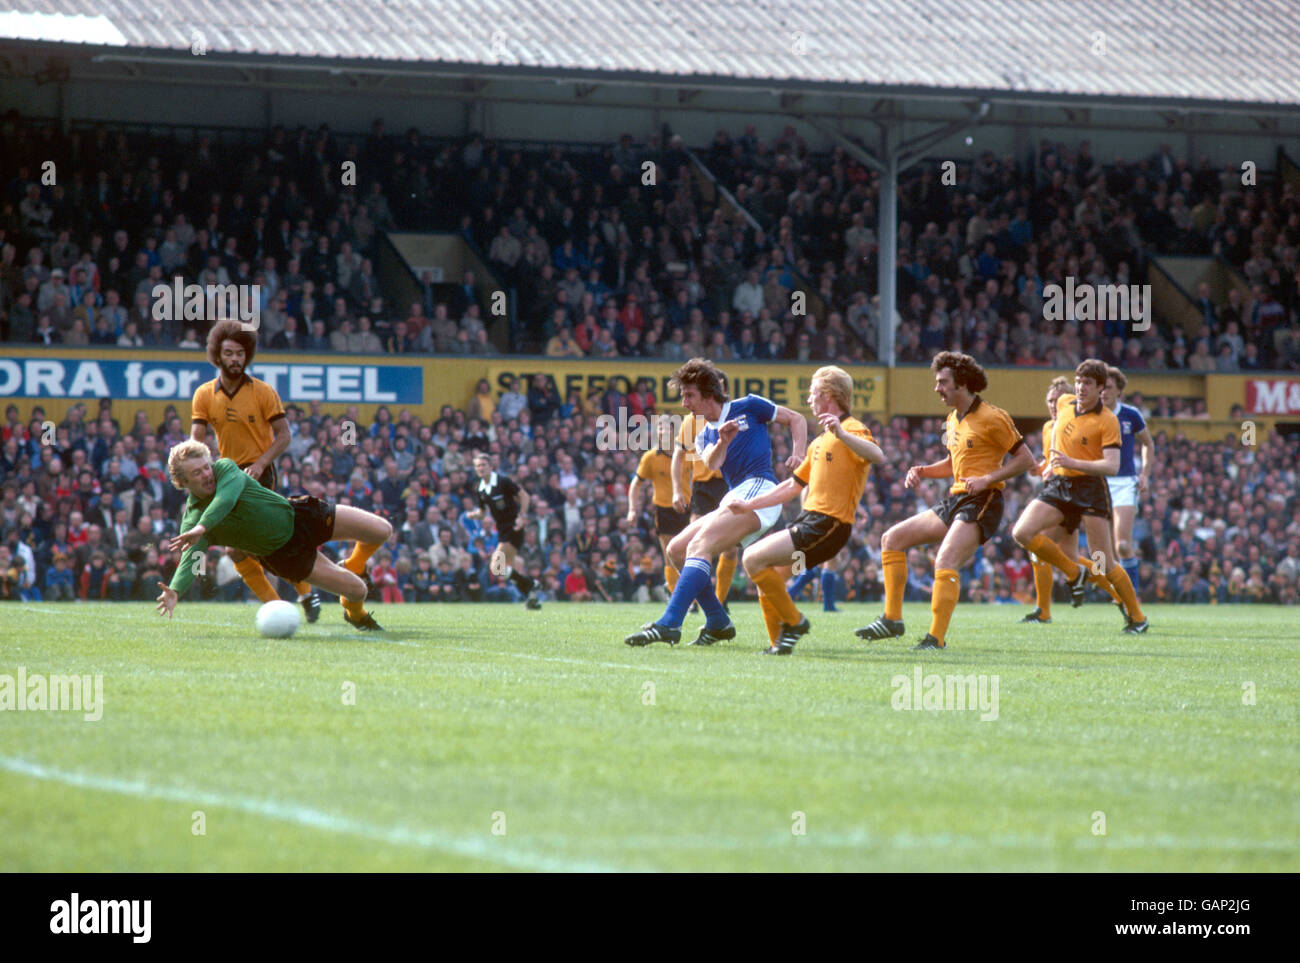 Wolverhampton Wanderers goalkeeper Paul Bradshaw (second l) dives to save from Ipswich Town's Paul Mariner (third l), watched by teammates George Berry (l), Willie Carr (third r), Geoff Palmer (second r) and Emlyn Hughes (r) Stock Photo